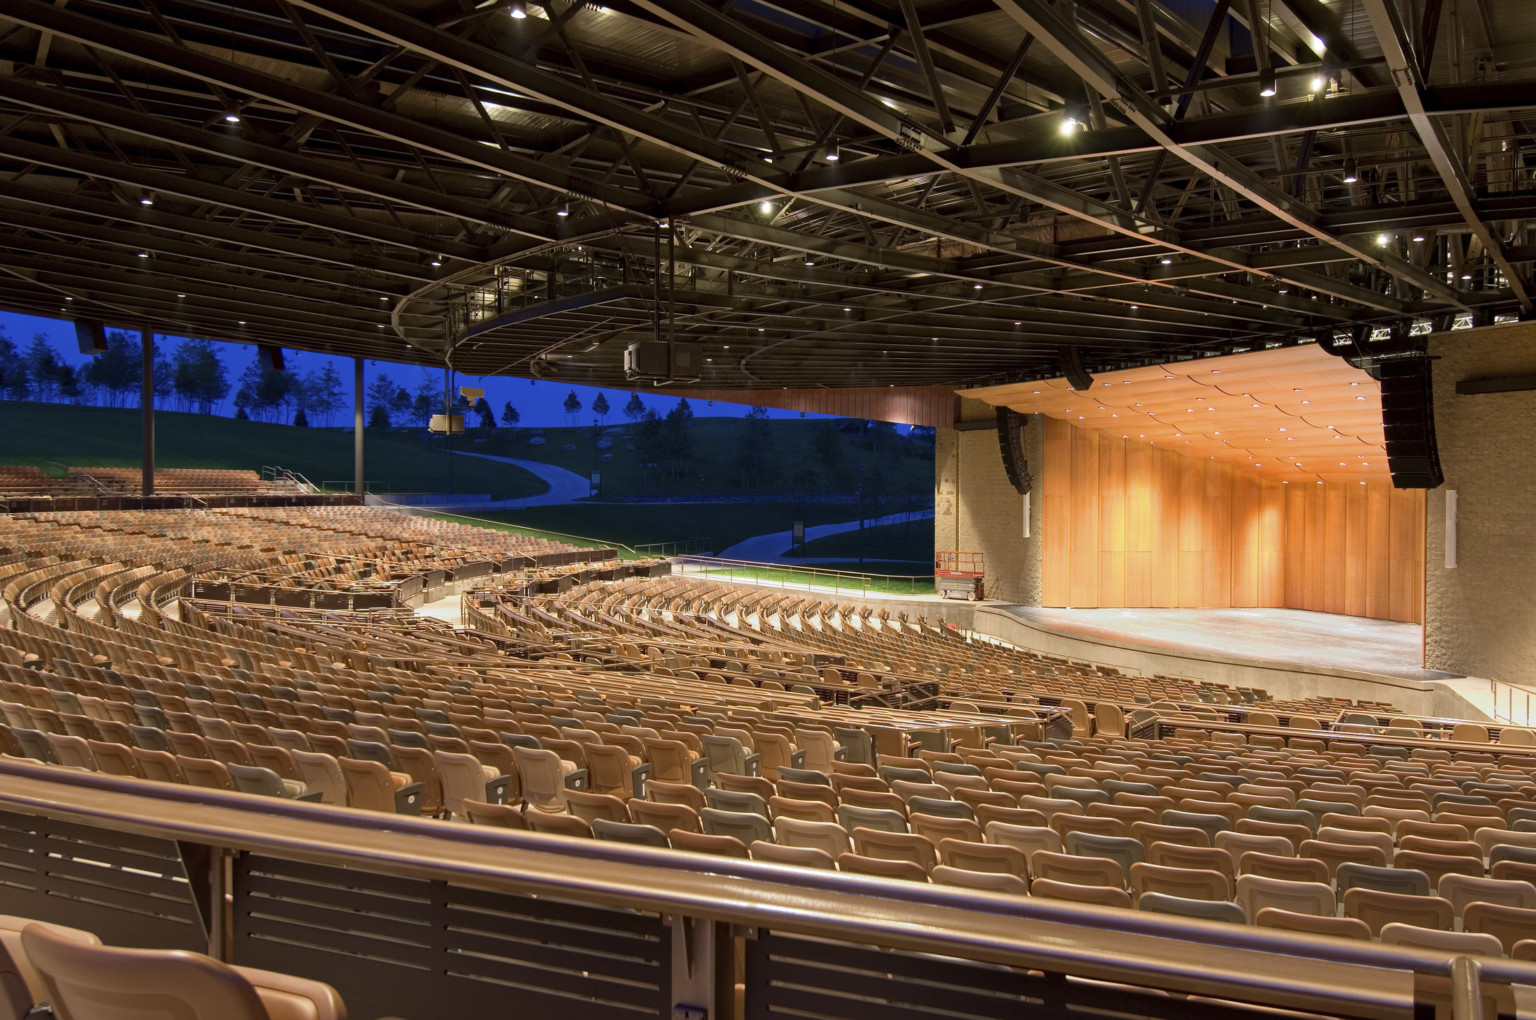 Light brown seats under black amphitheater roof facing wood paneled stage with rounded panel ceiling and recessed lights